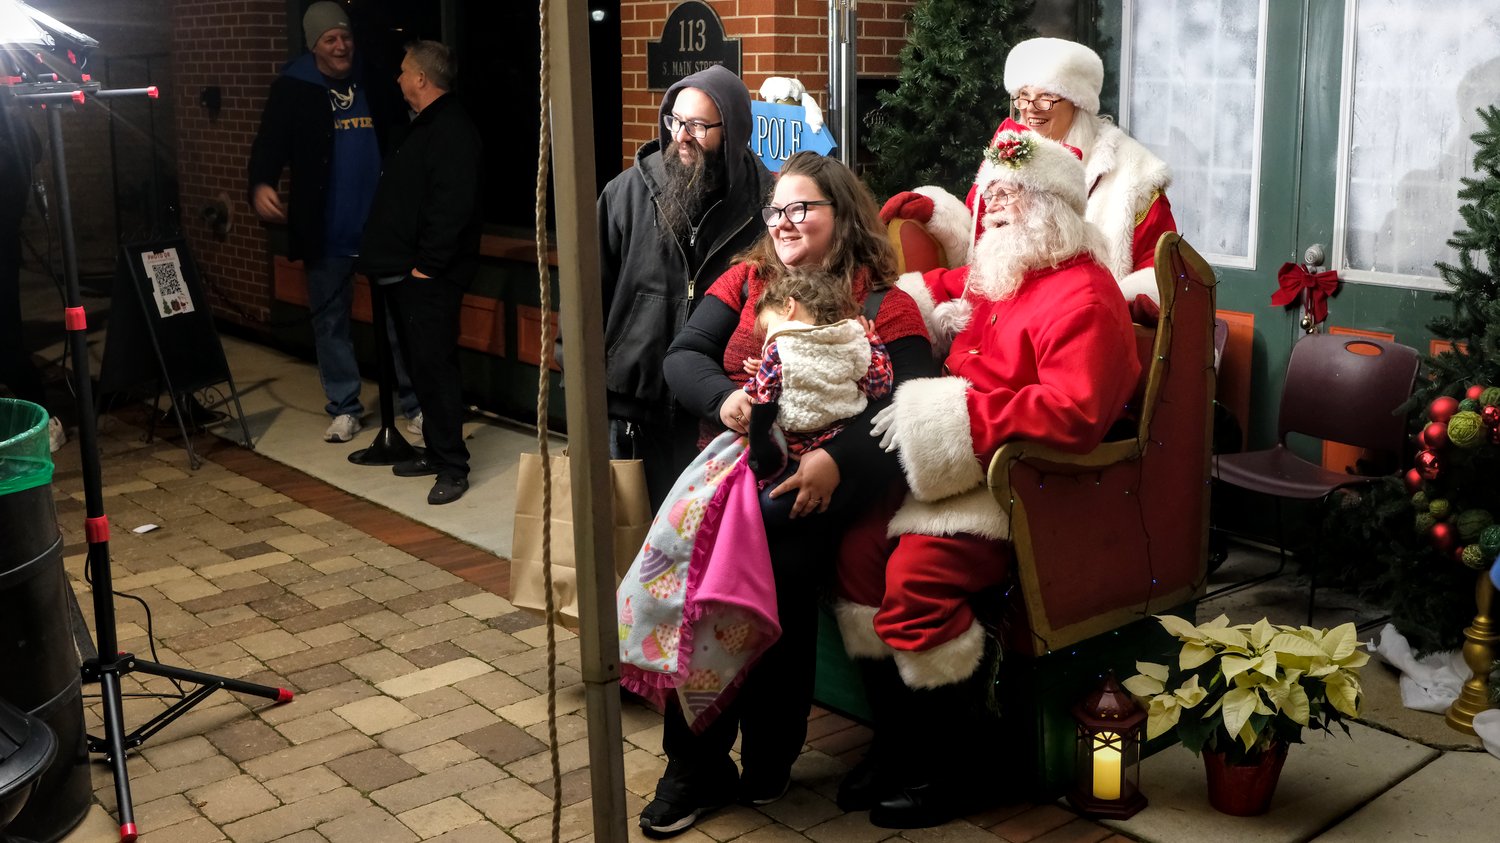 Family getting their photo taken with Santa and Mrs. Claus.